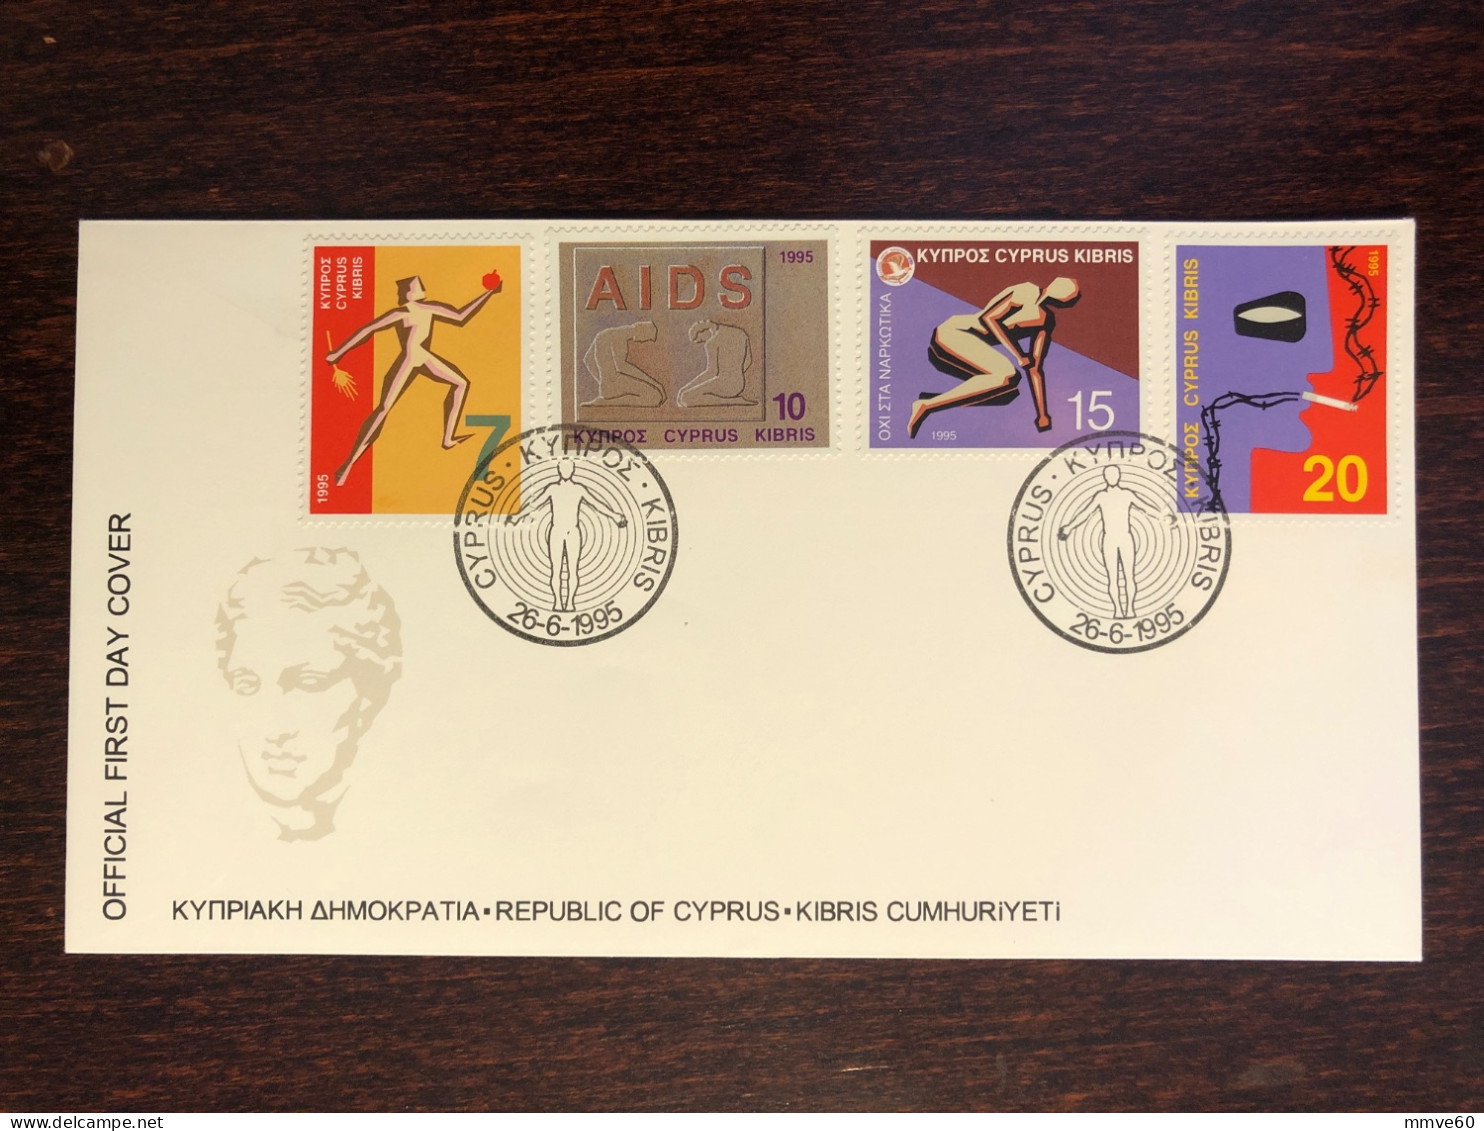 CYPRUS FDC COVER 1995 YEAR AIDS SIDA HEALTH MEDICINE STAMPS - Cartas